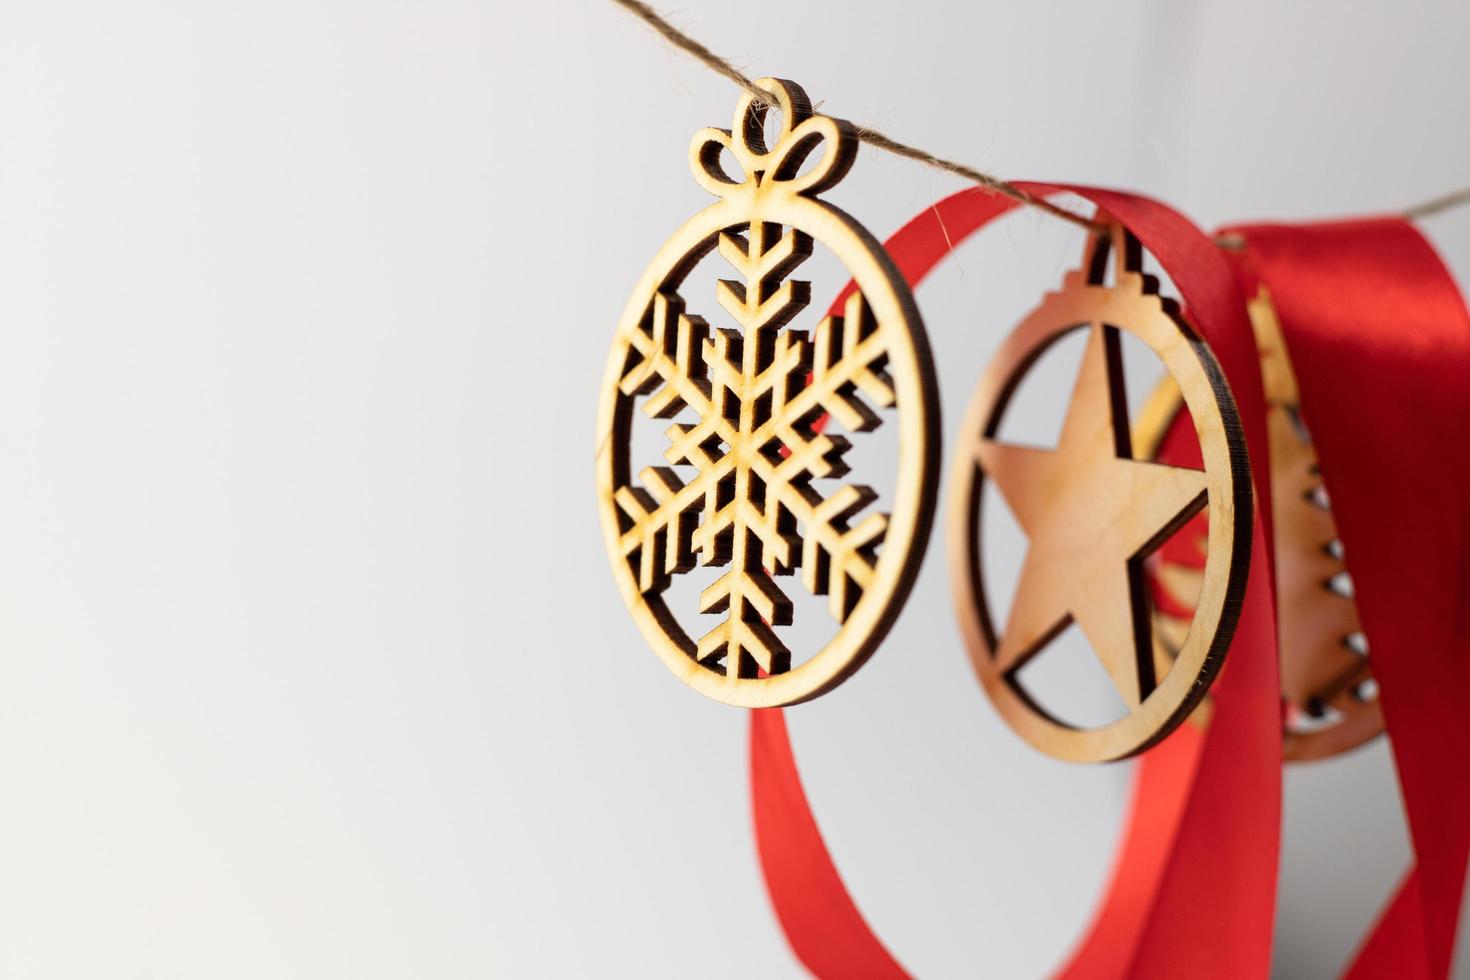 A wooden Christmas ornament hanging on a string with a red ribbon photo